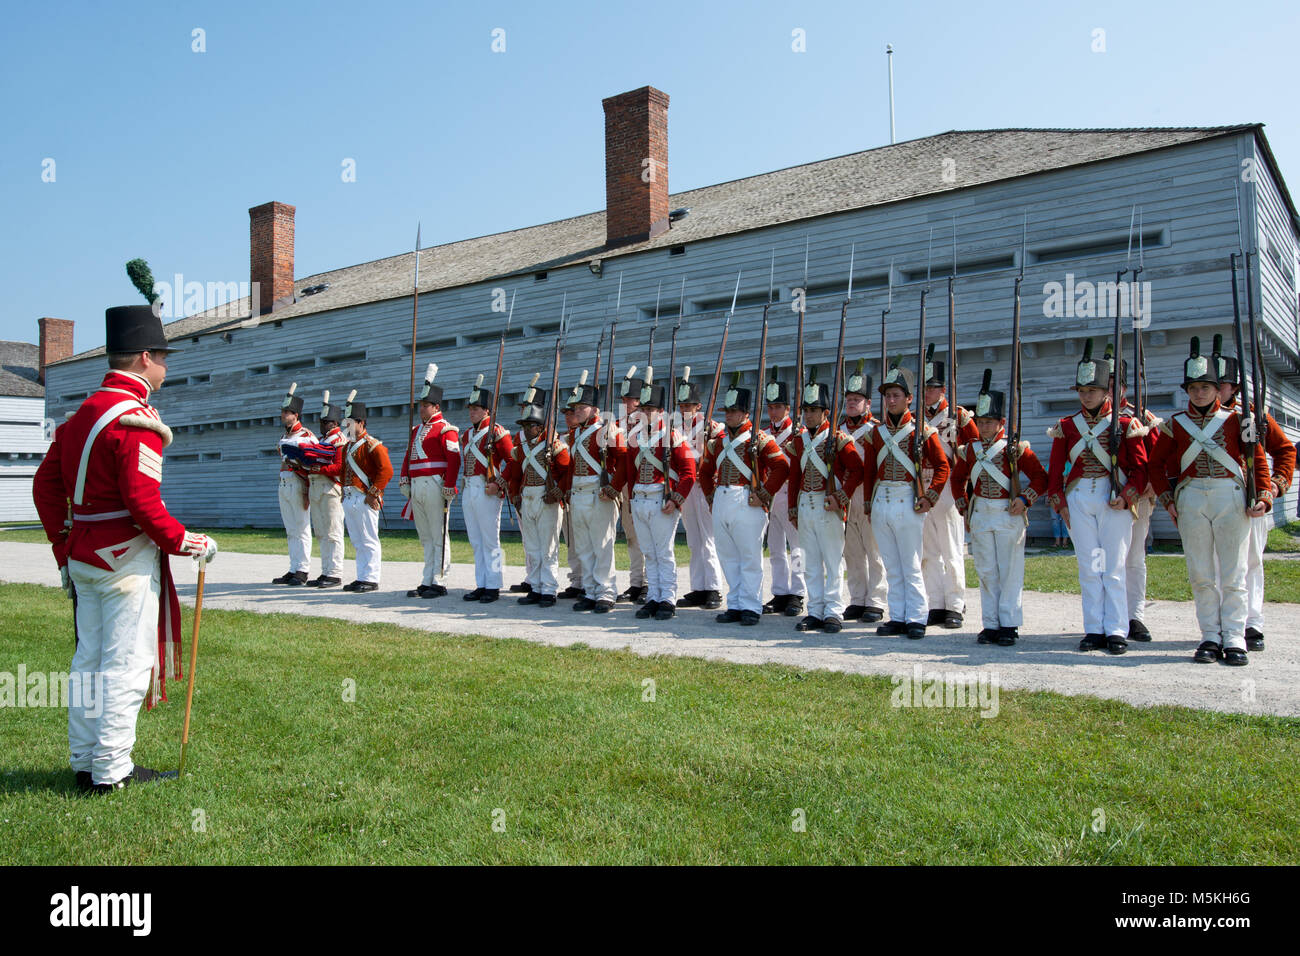 The Morning Parade and Inspection at the Fort George Historic Site, Niagara-on-the-Lake, Ontario, Canada Stock Photo